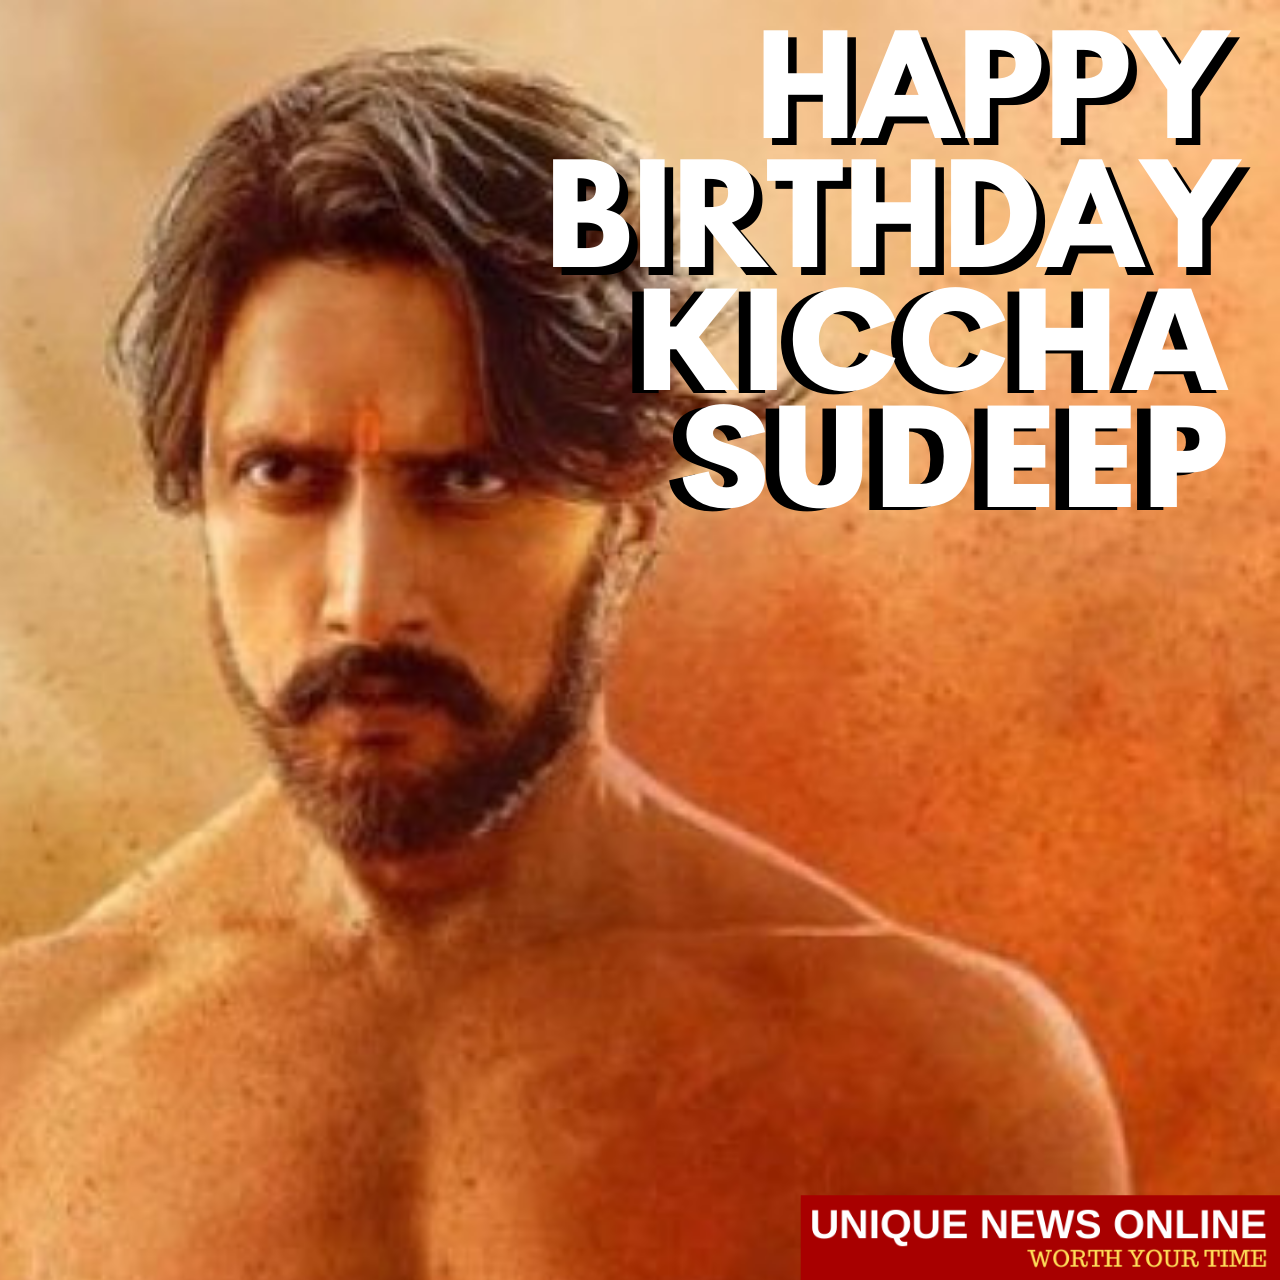 Happy Birthday Kiccha Sudeep Wishes, Images, Quotes, Status, and Messages to greet Kannada Superstar